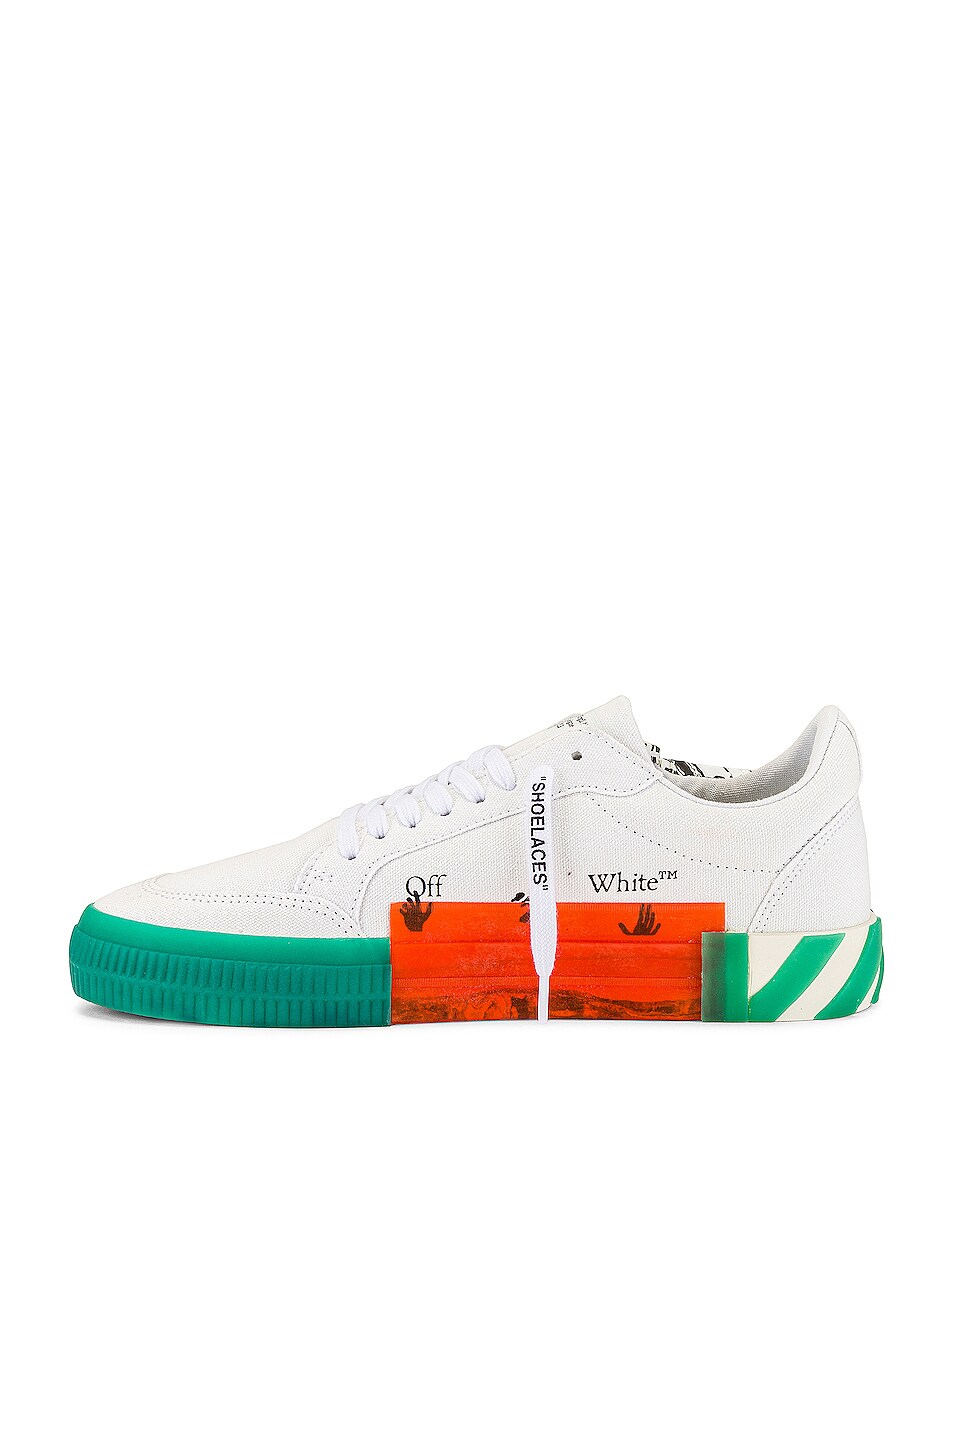 OFF-WHITE Low Vulcanized Canvas Sneaker in White & Green | FWRD